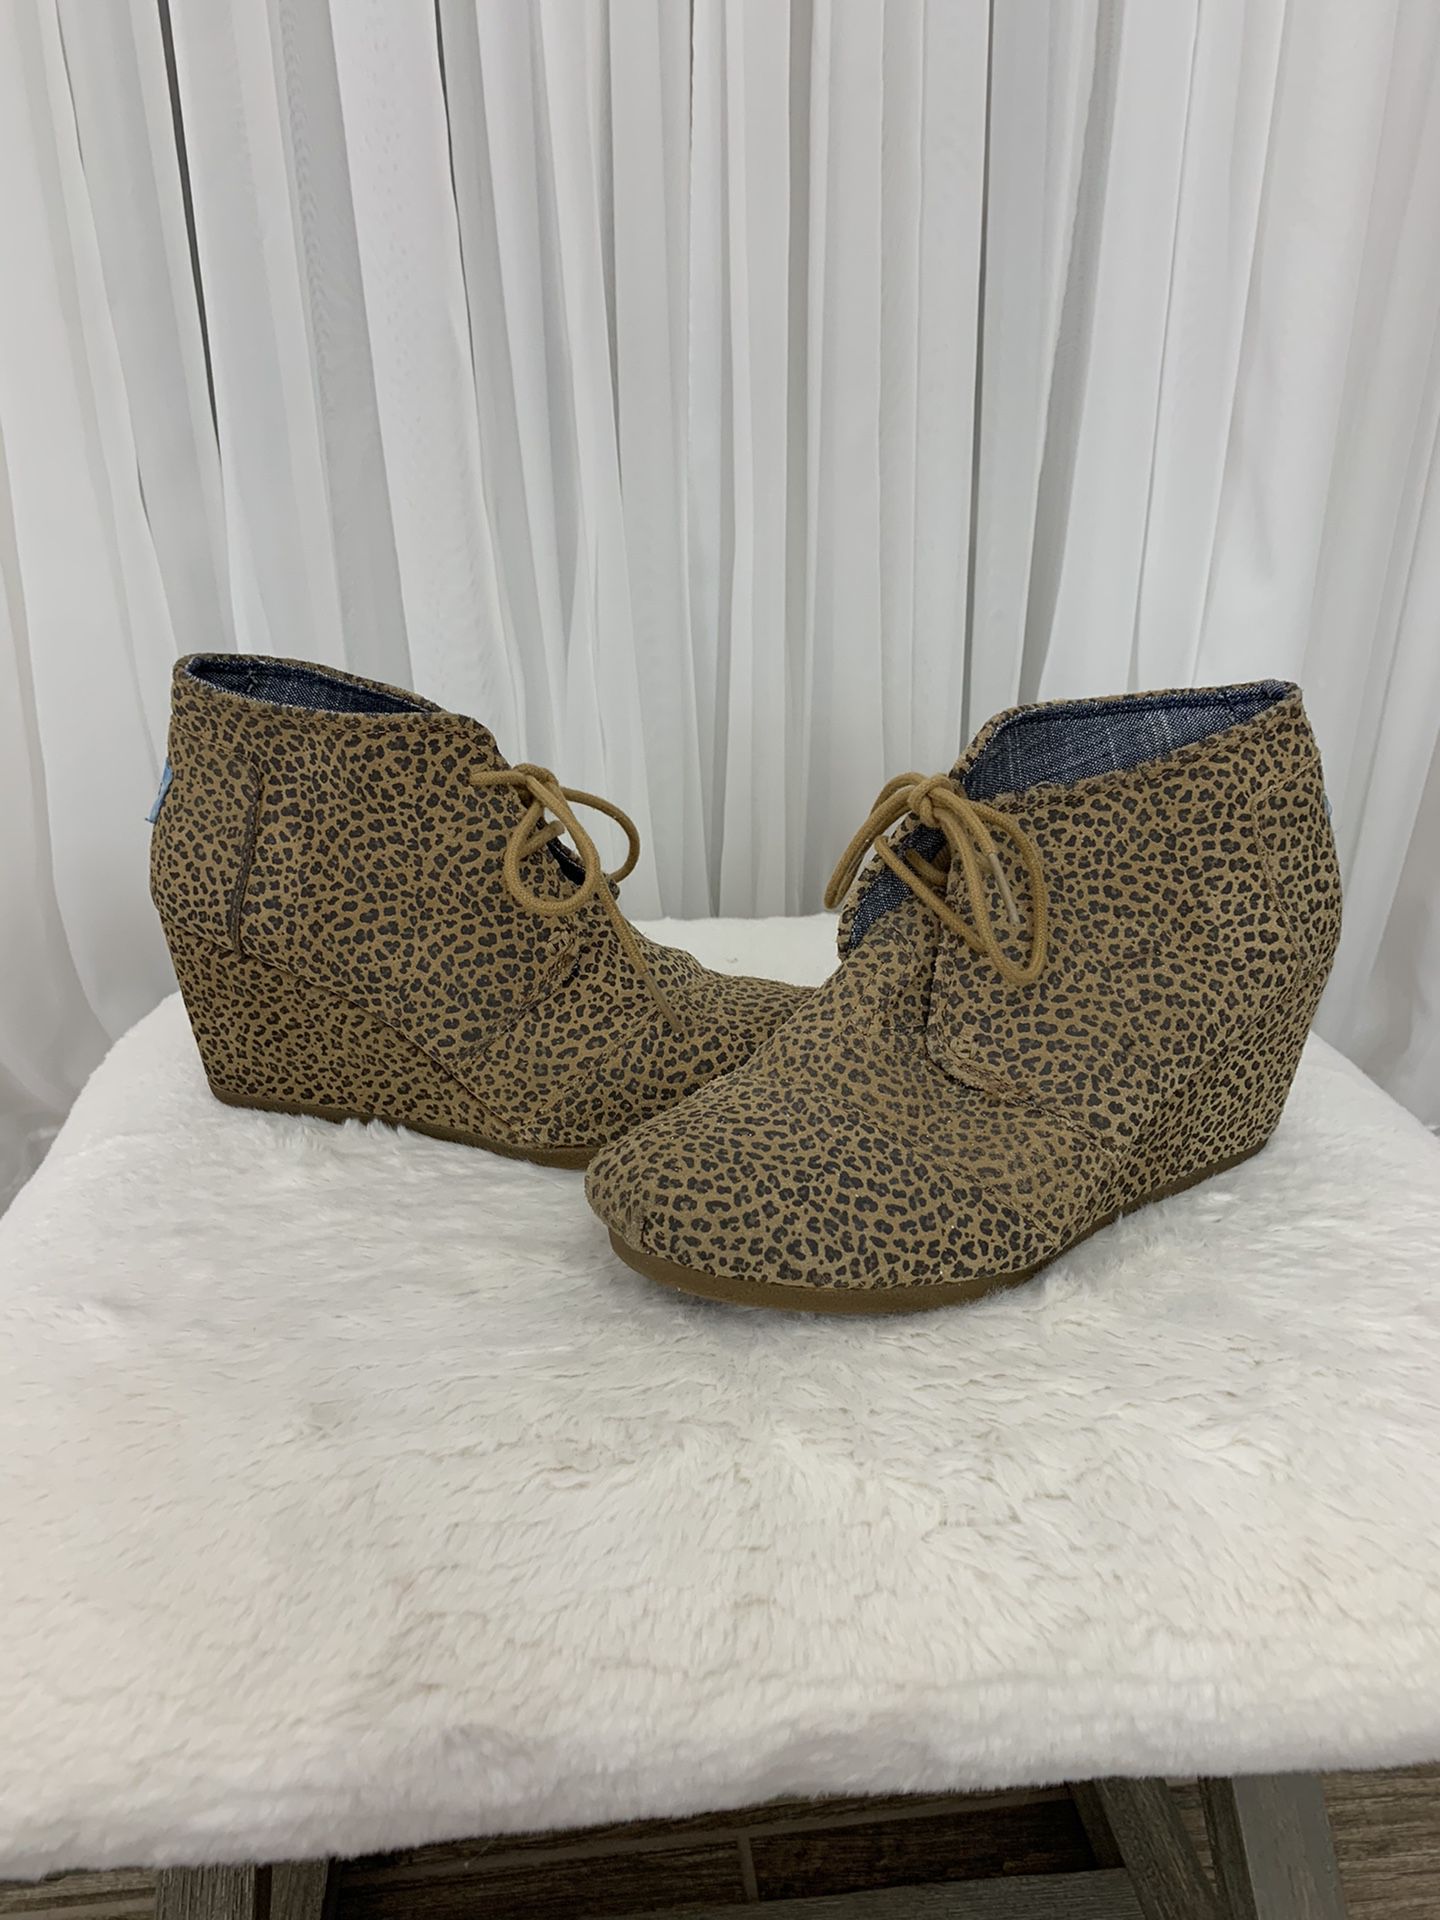 Toms Animal Print Bootie size 7.5